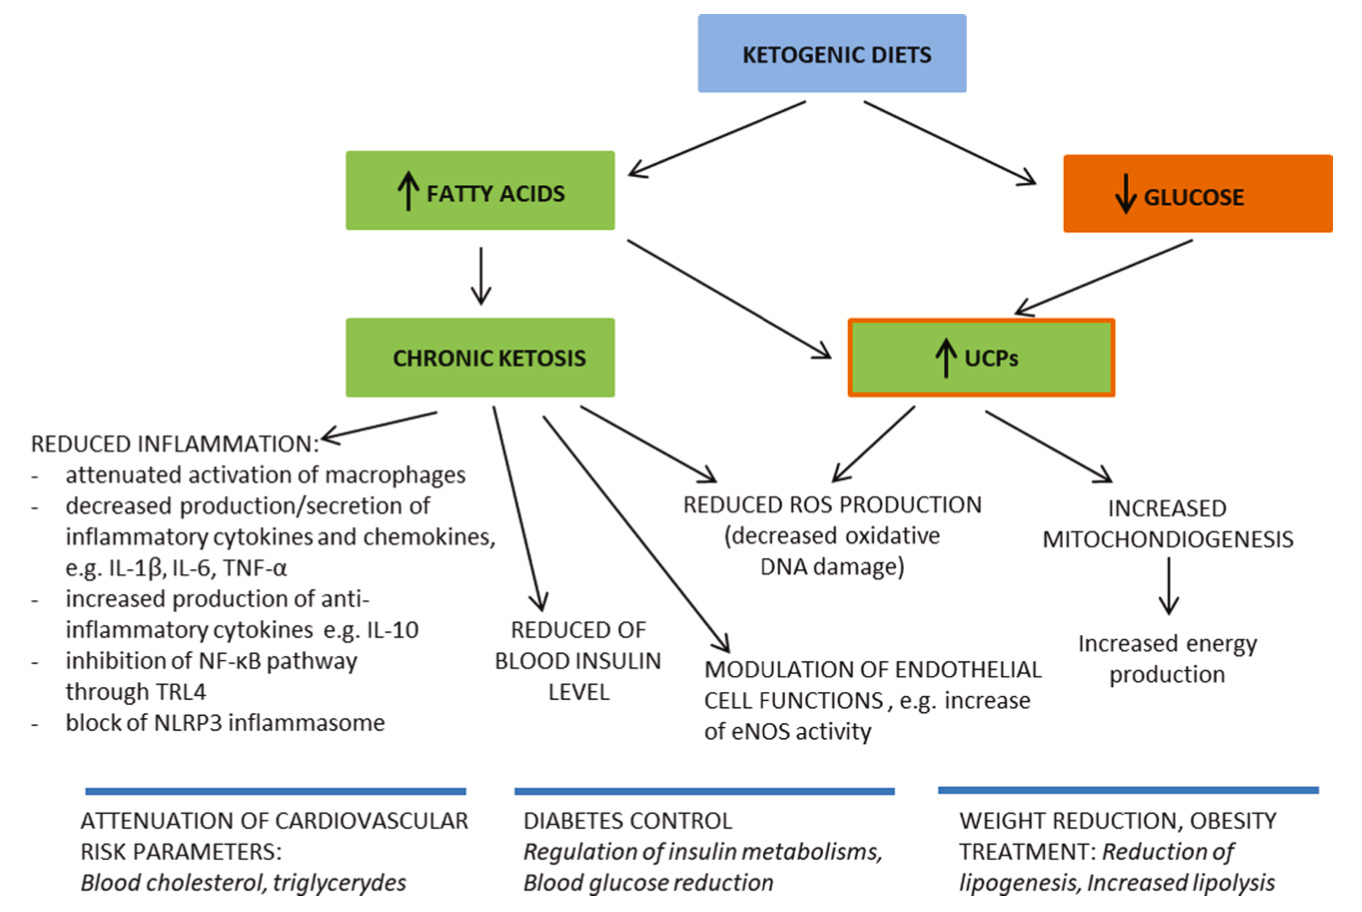 Possible effects of the KD to combat hypertension and other obesity-related cardiovascular conditions